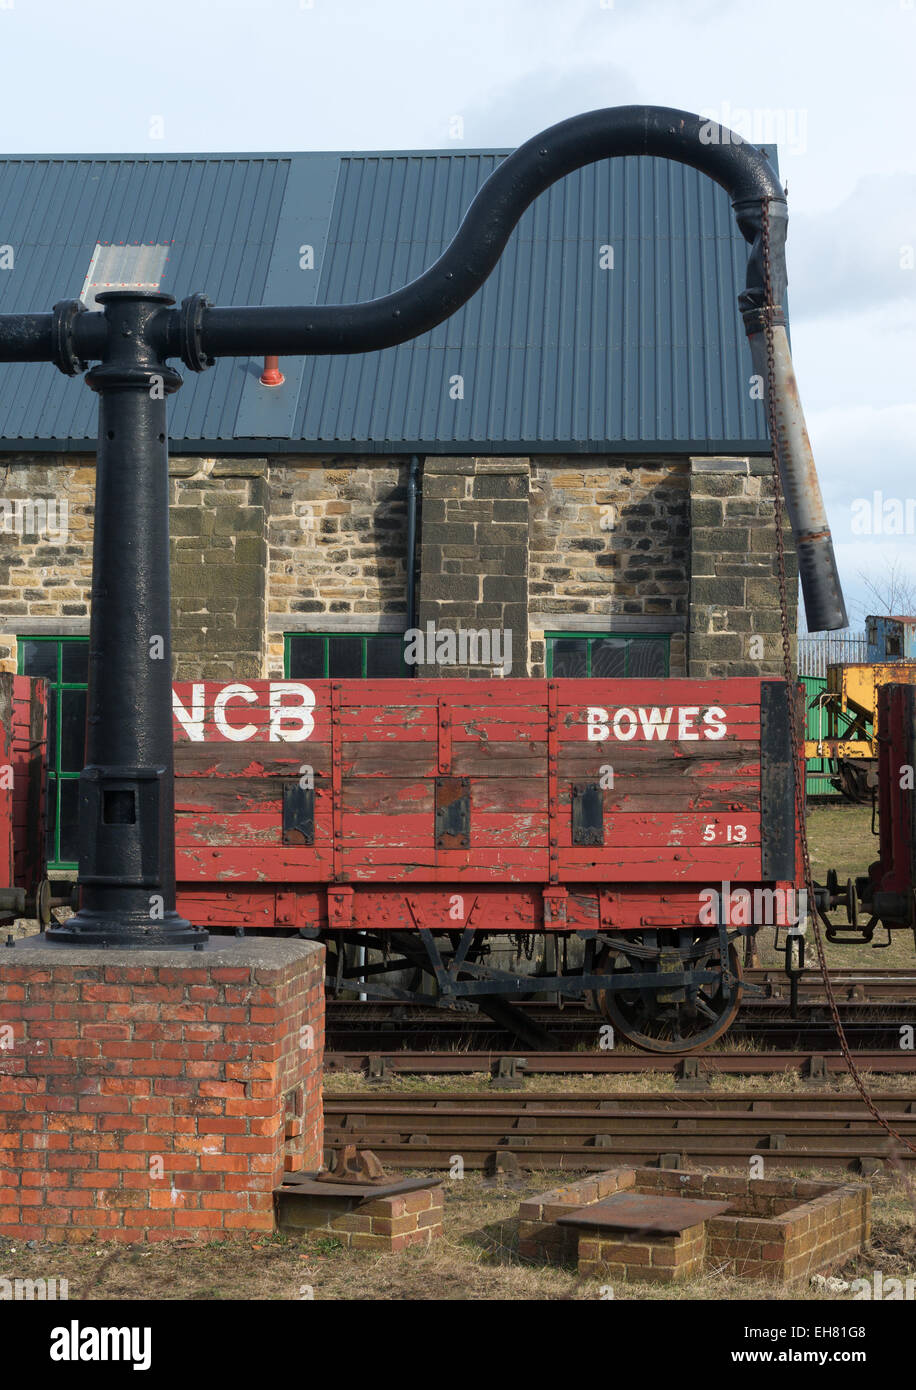 A water crane frames a NCB coal truck at the Bowes Railway, north east England, UK Stock Photo